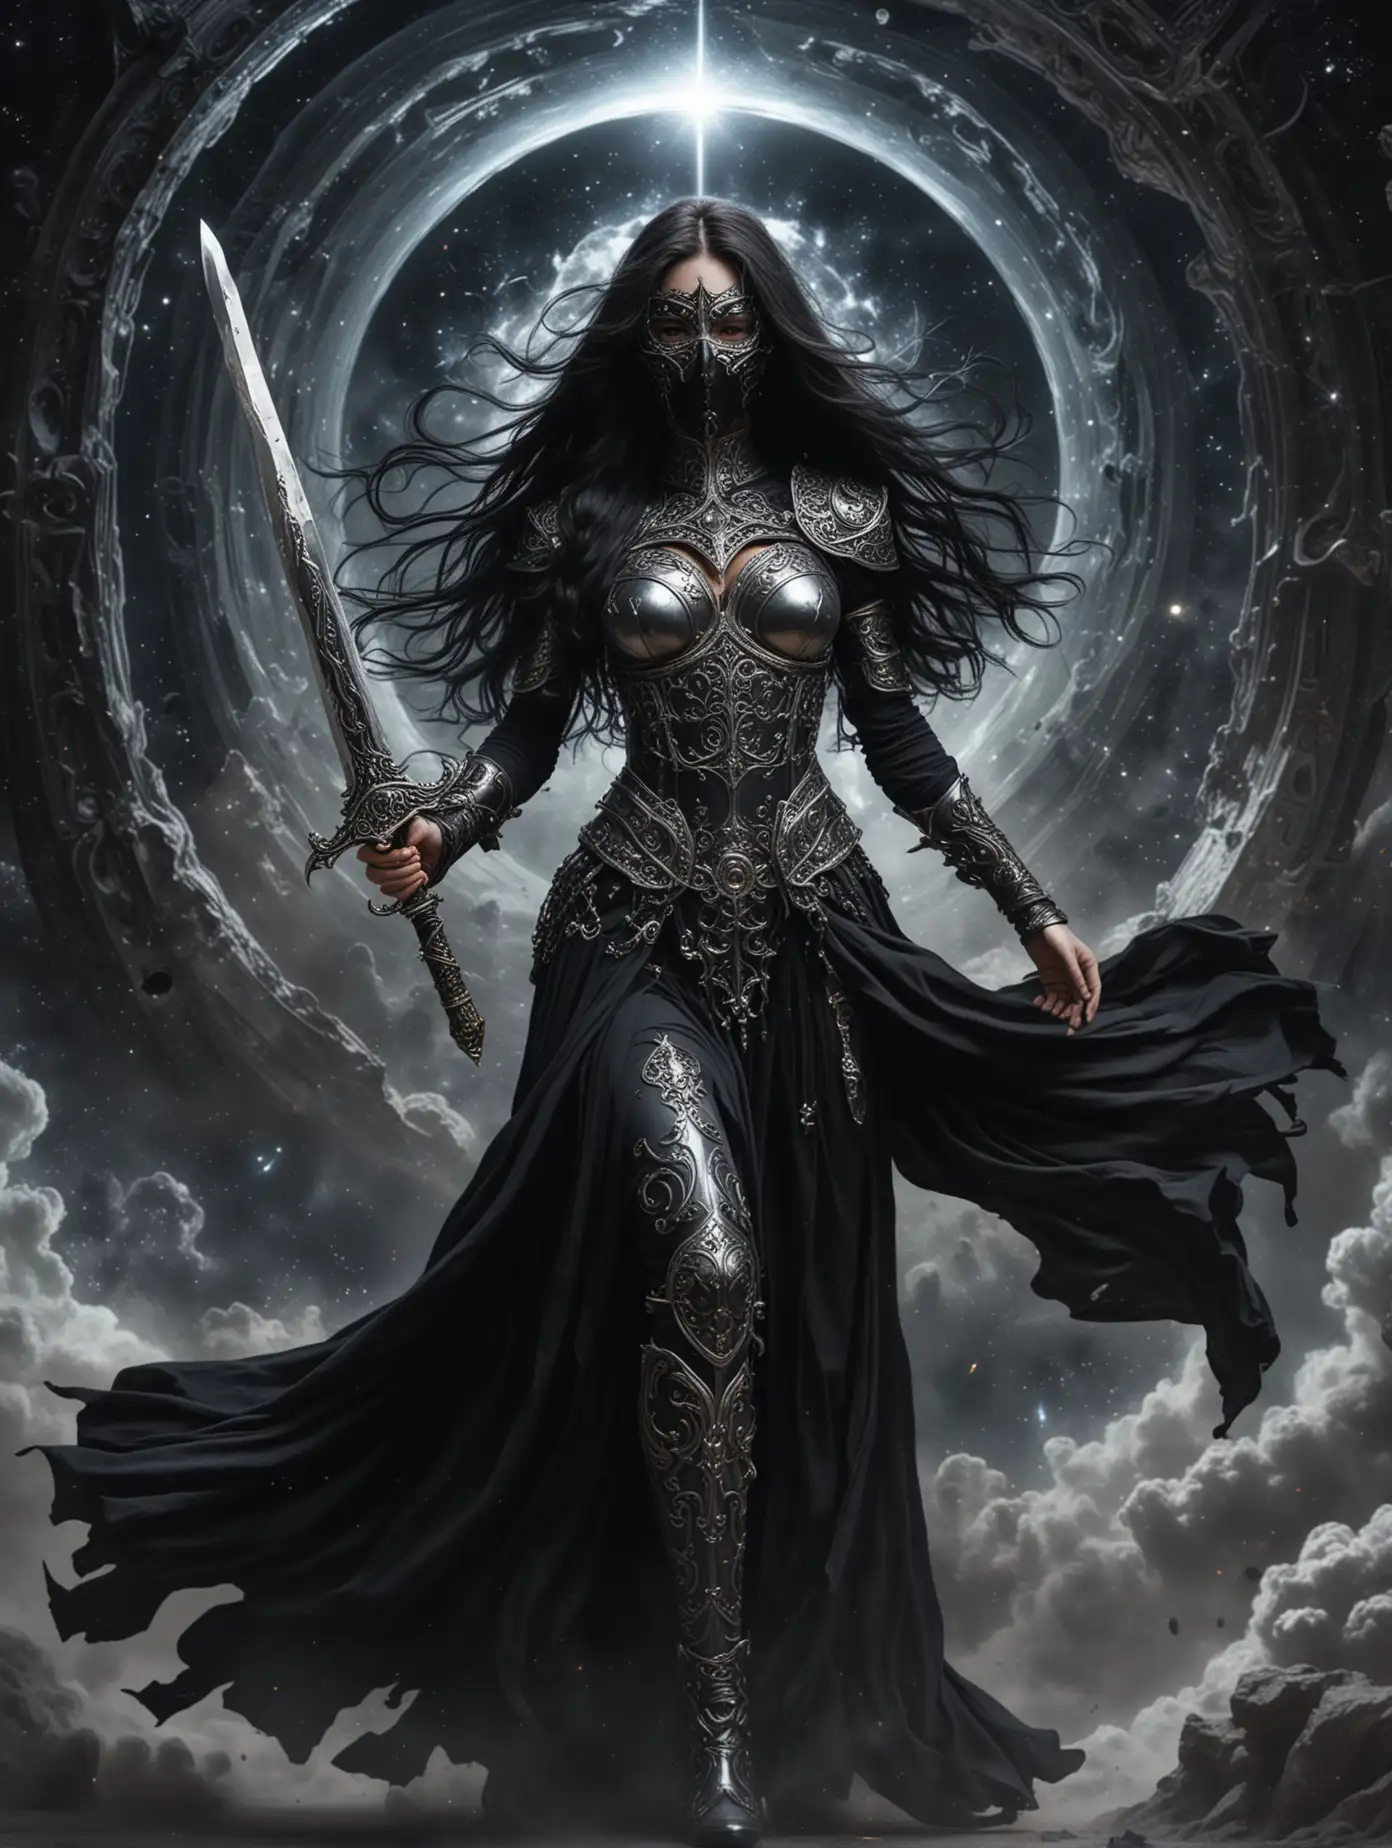 Dark-Priestess-Warrior-Mystical-Woman-in-Silver-Armor-and-Mask-with-Sword-in-Space